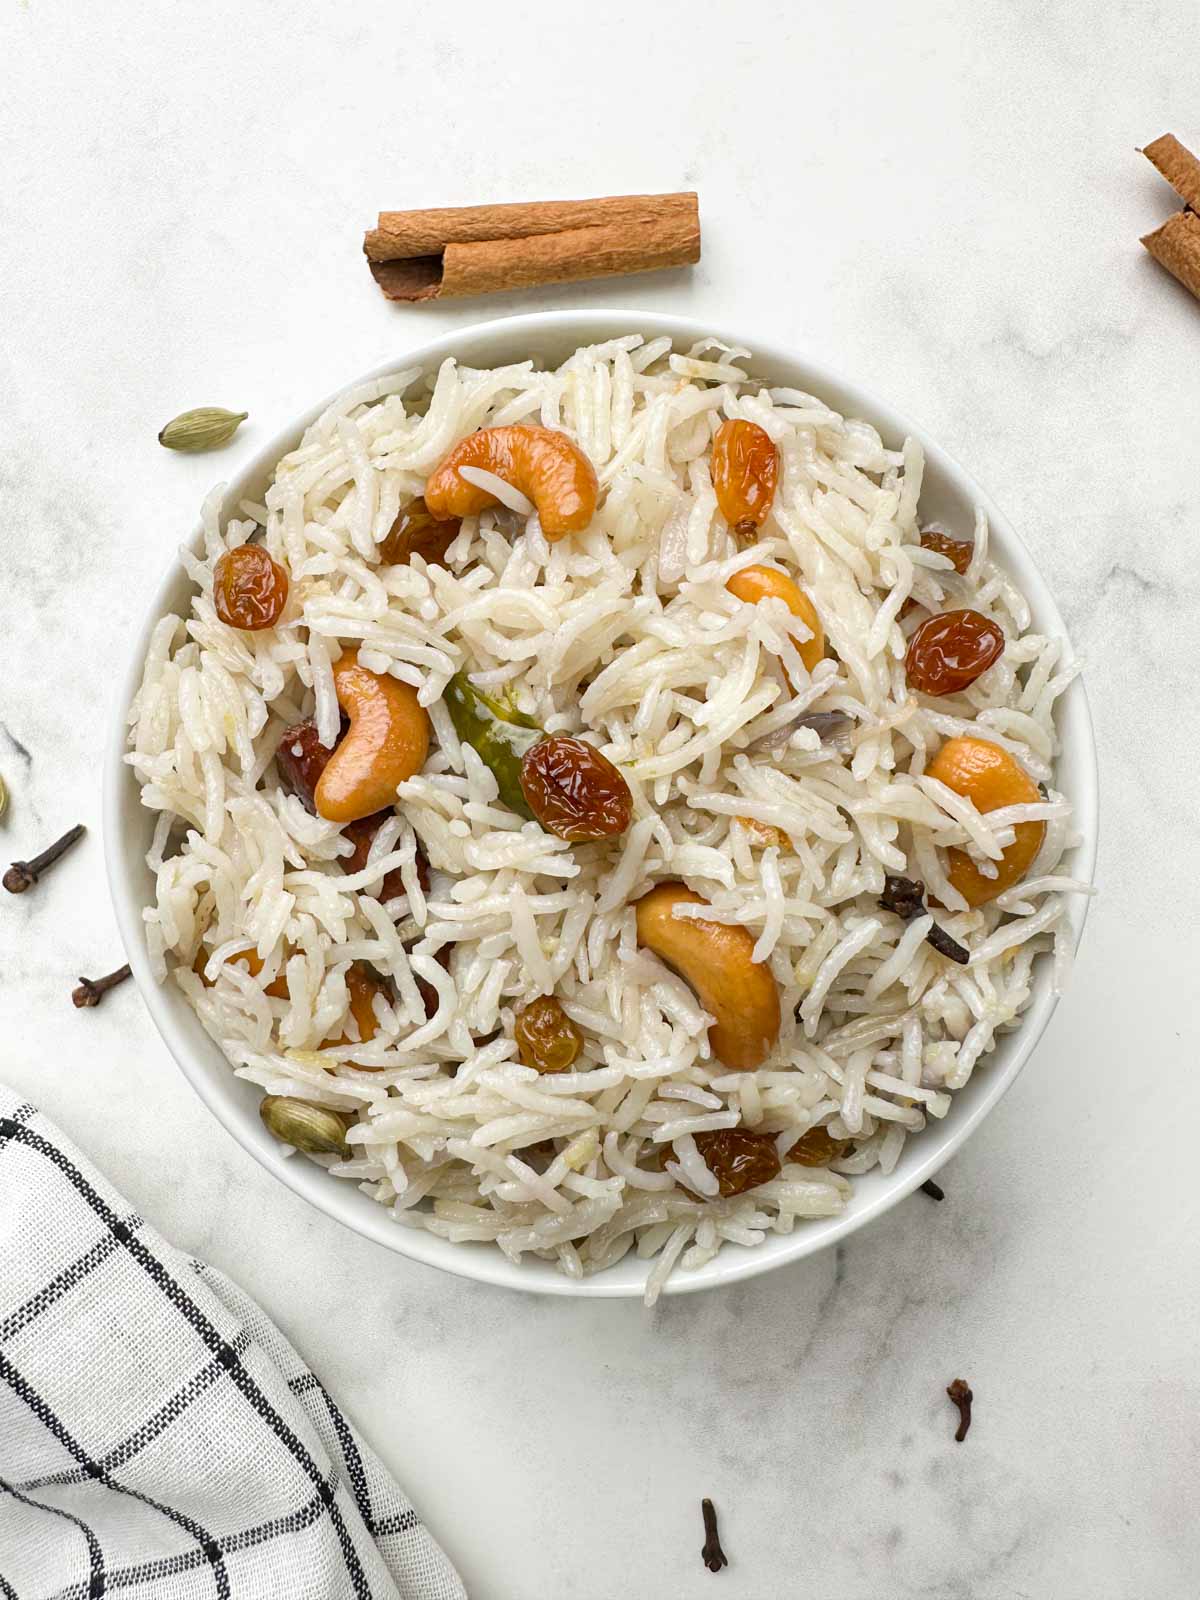 instant pot ghee rice served in a white bowl garnished with nuts and spices on the side